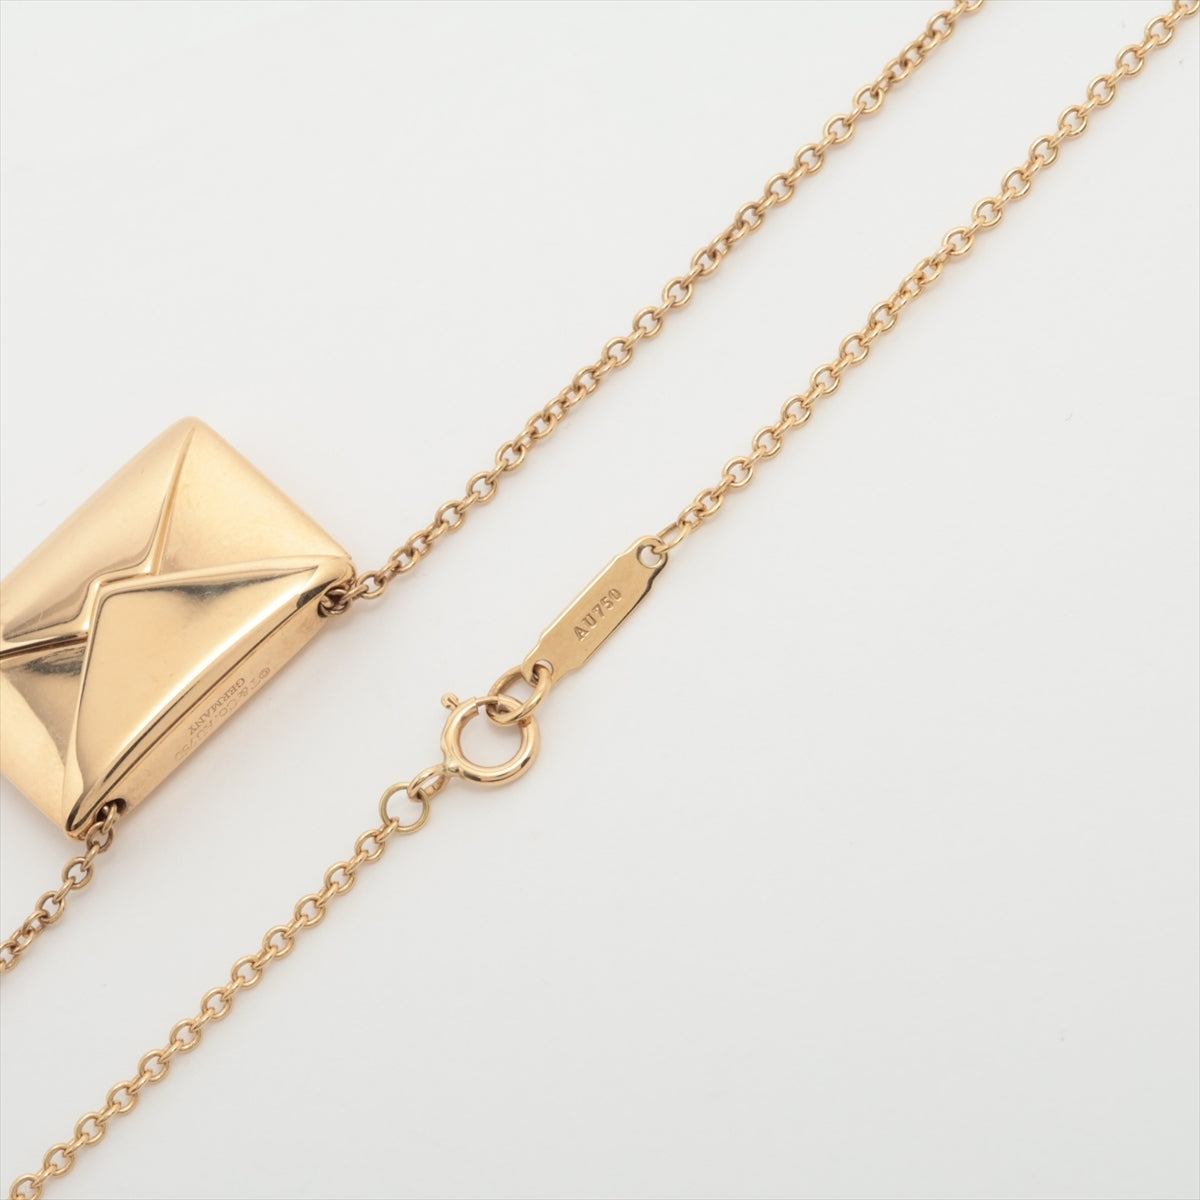 Tiffany Necklace 925×750 11.6g Gold × Silver Suites Nothing envelopes